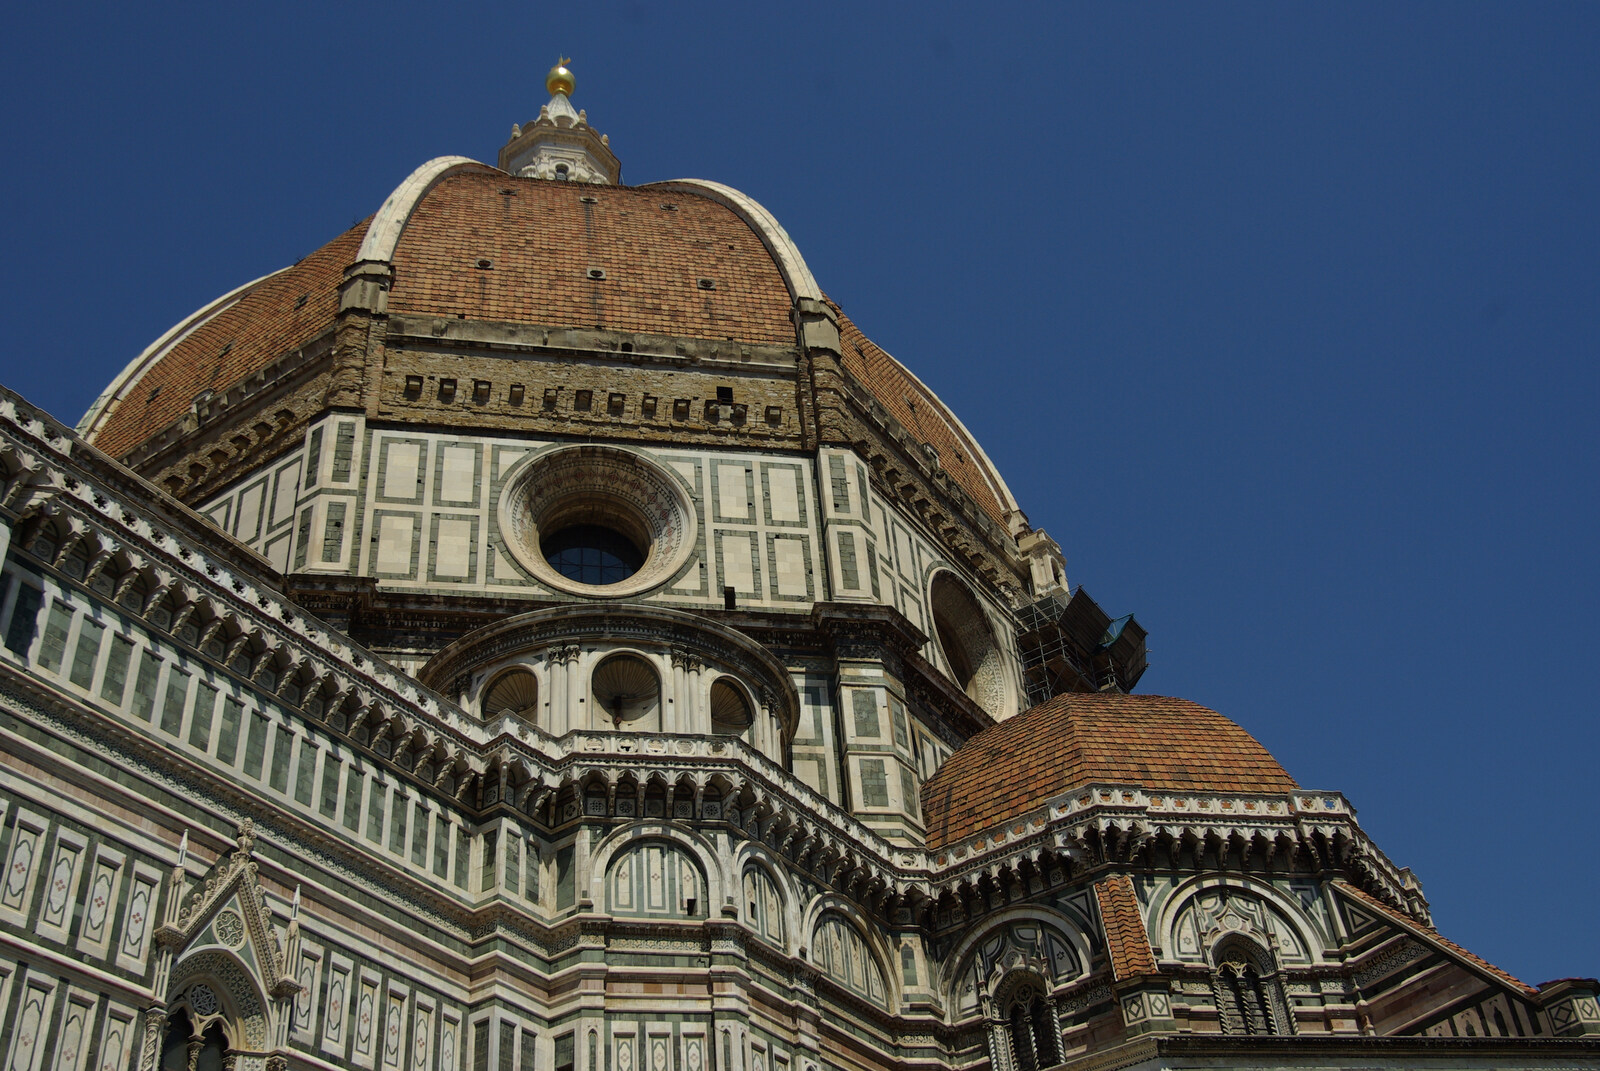 A Day Trip to Firenze, Tuscany, Italy - 24th July 2008: The view of the dome